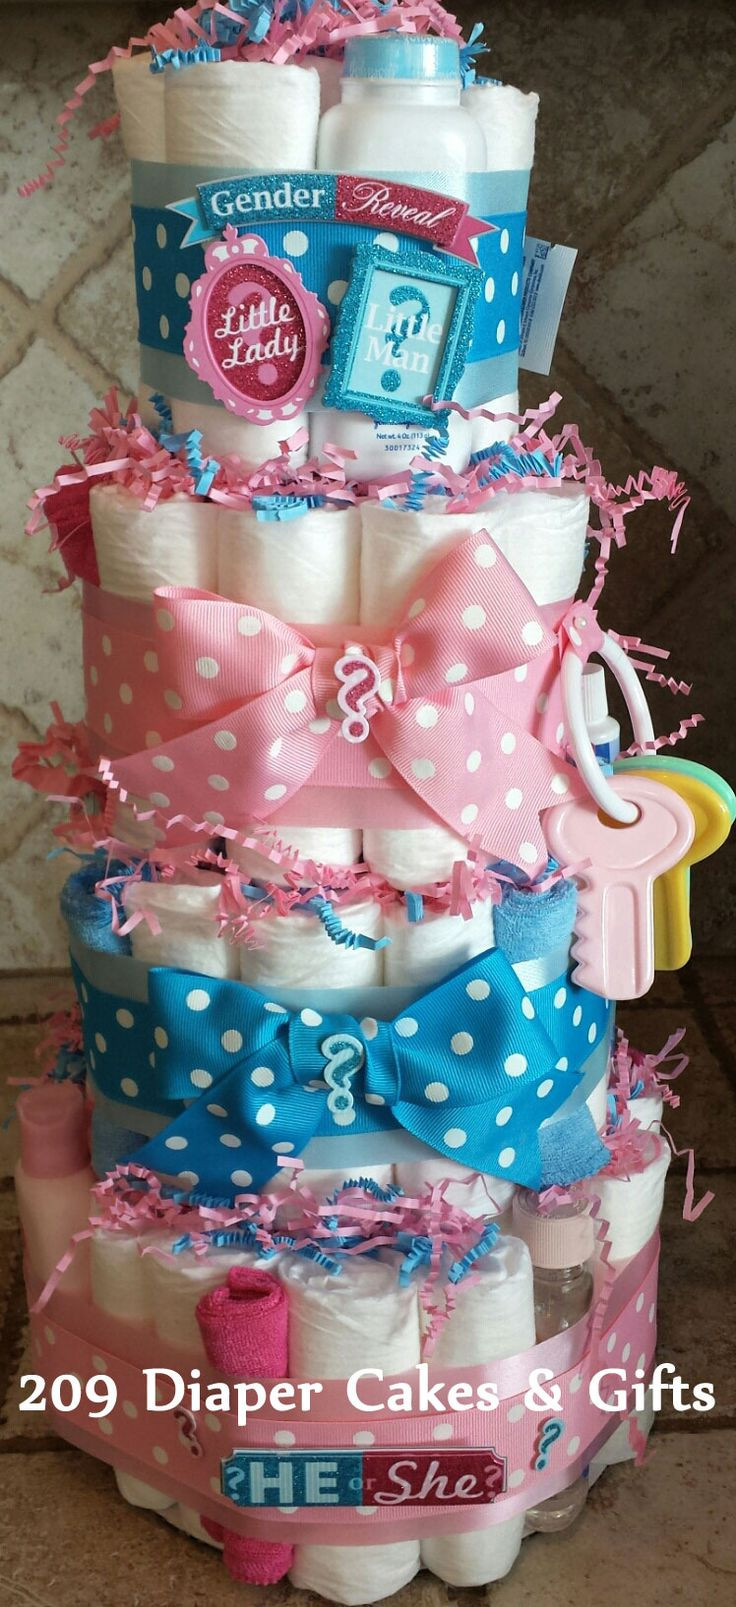 Gender Party Gift Ideas
 4 Tier Pink & Blue Gender Reveal Diaper Cake by 209 Diaper